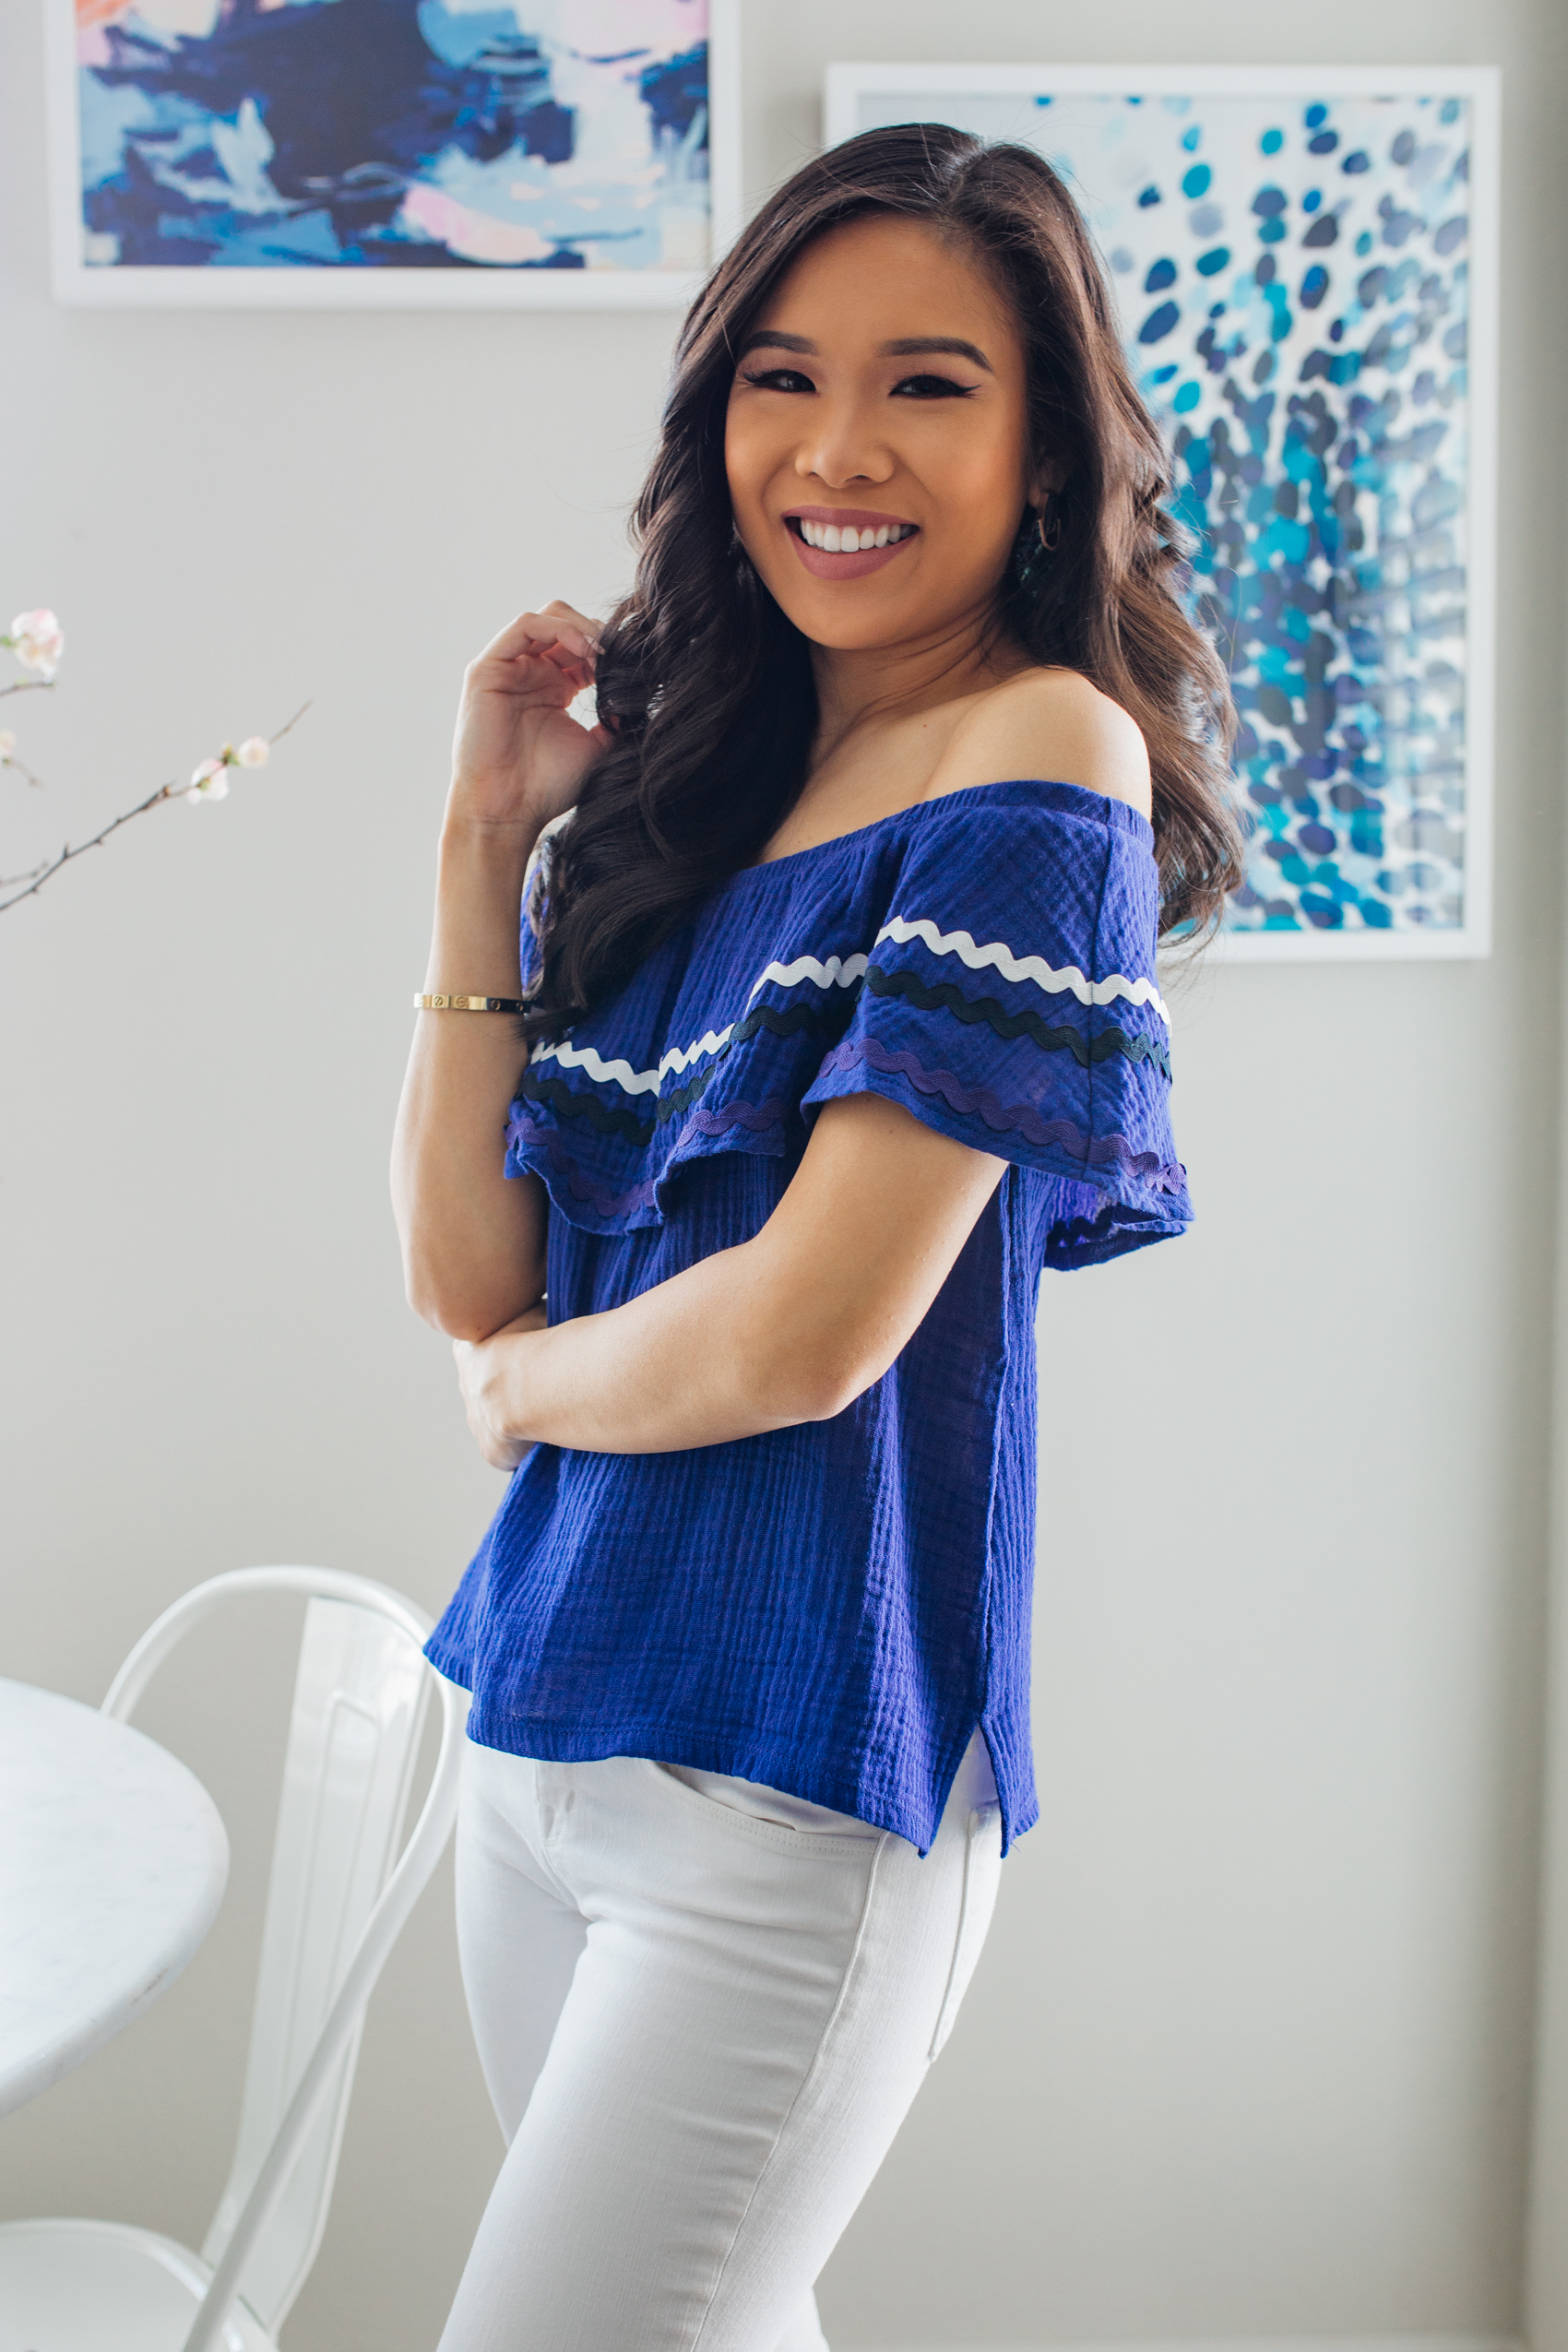 Blogger Hoang-Kim shares she'll be designing a top for the Gibson x International Women's Day Collection